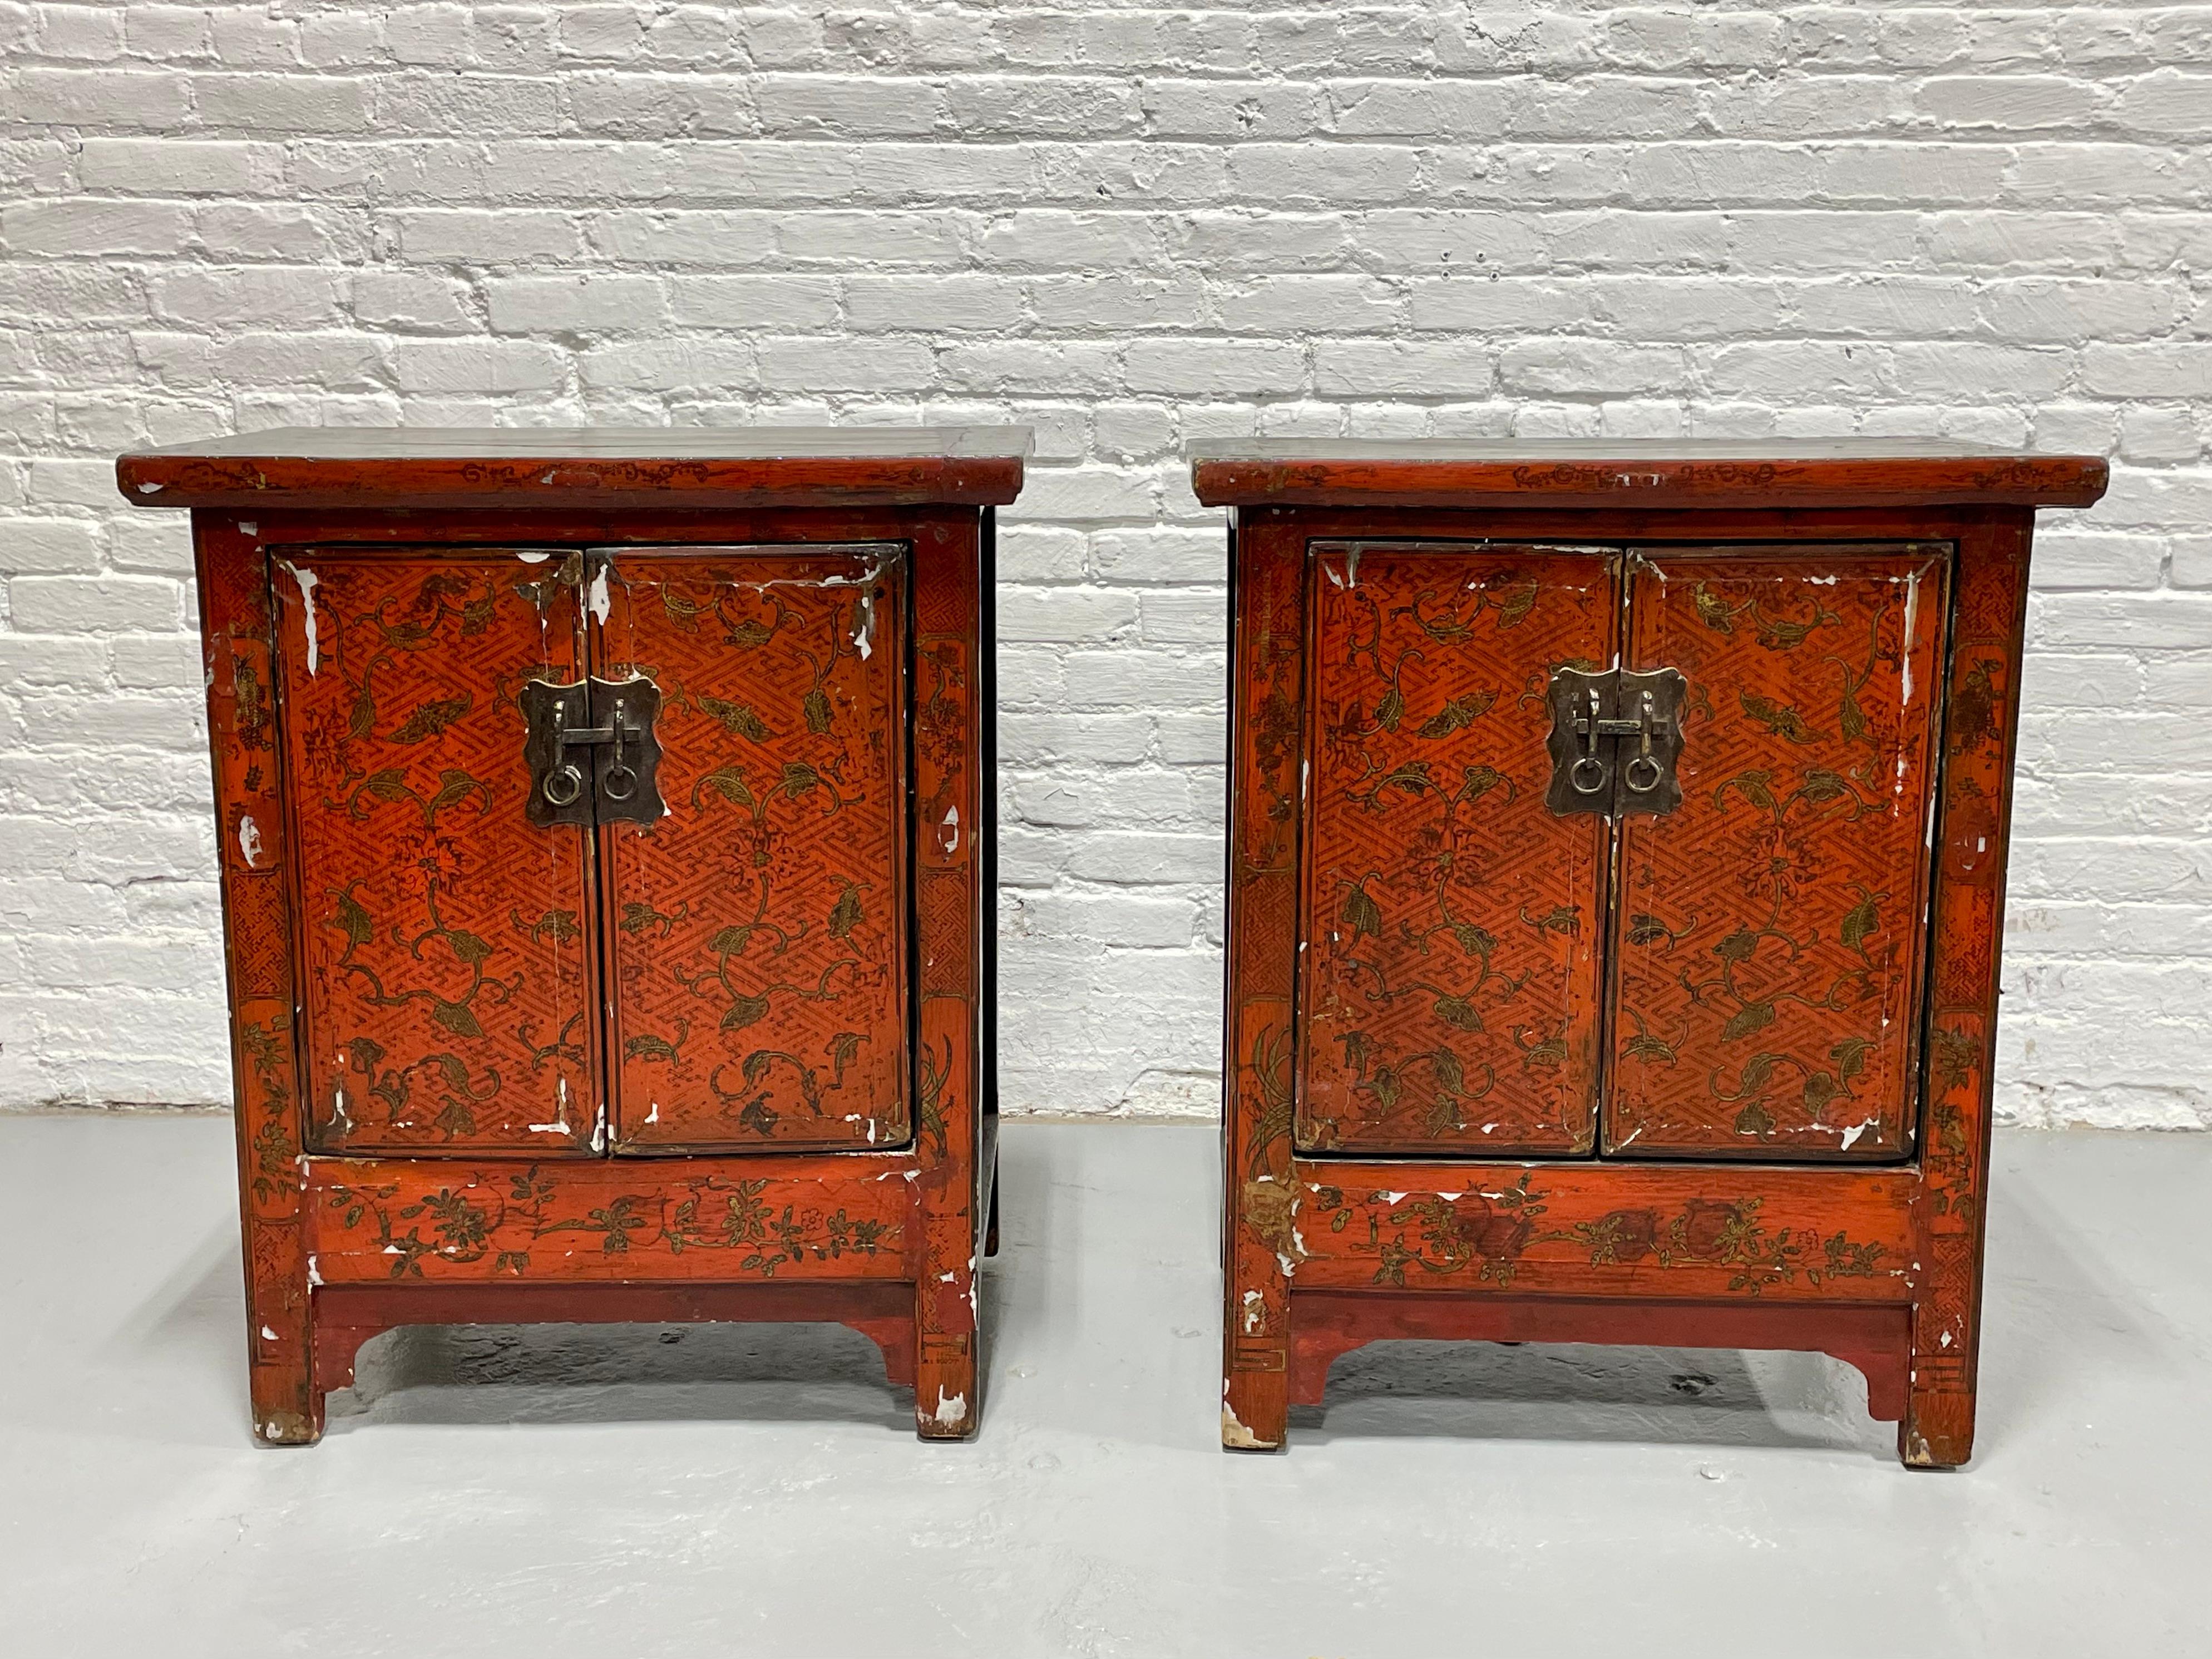 Lacquered Antique Red Lacquer Chinese 